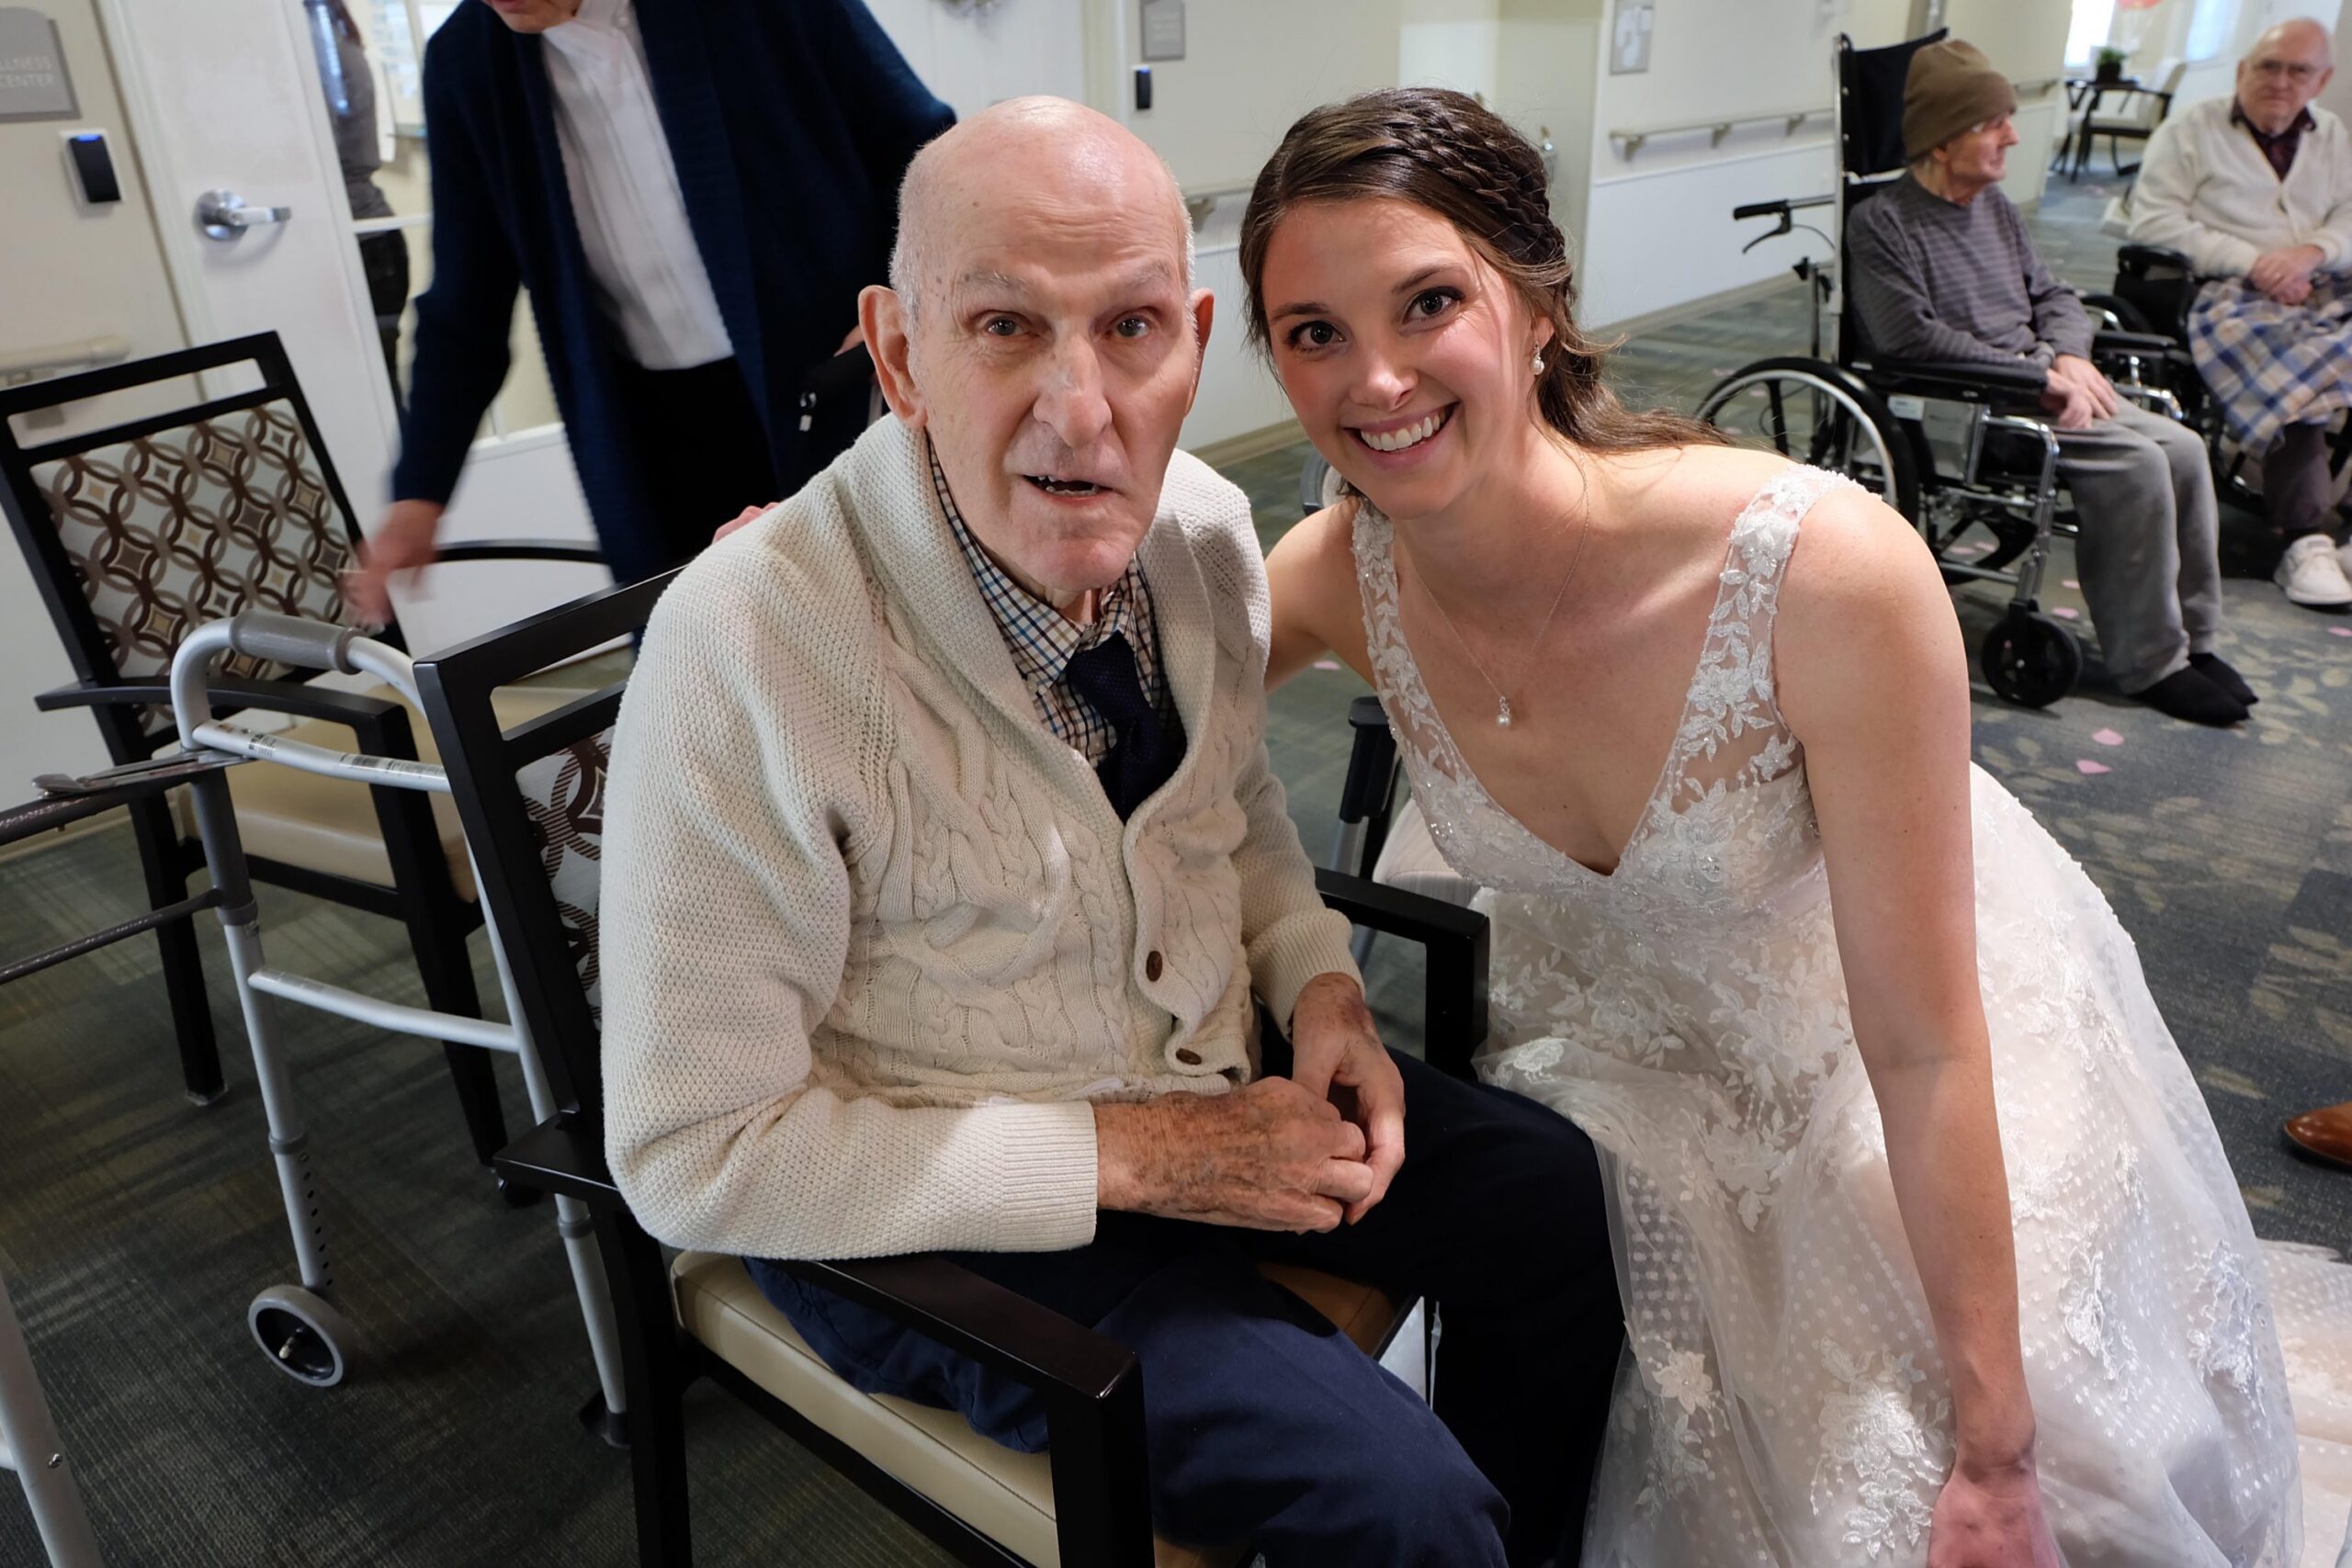 Resident’s Granddaughter Brings Wedding Reception To Community